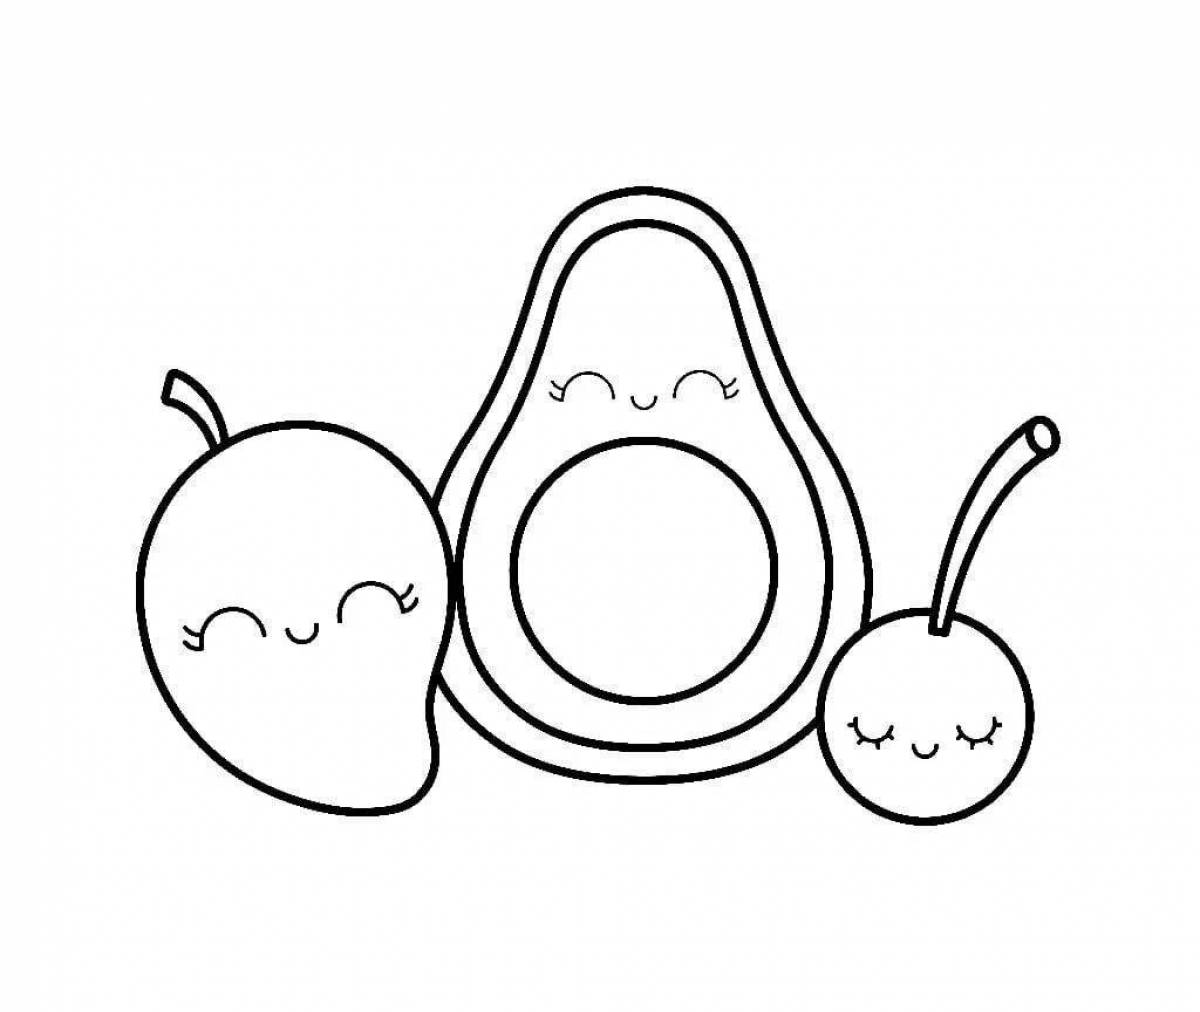 Colorful avocado coloring page for girls